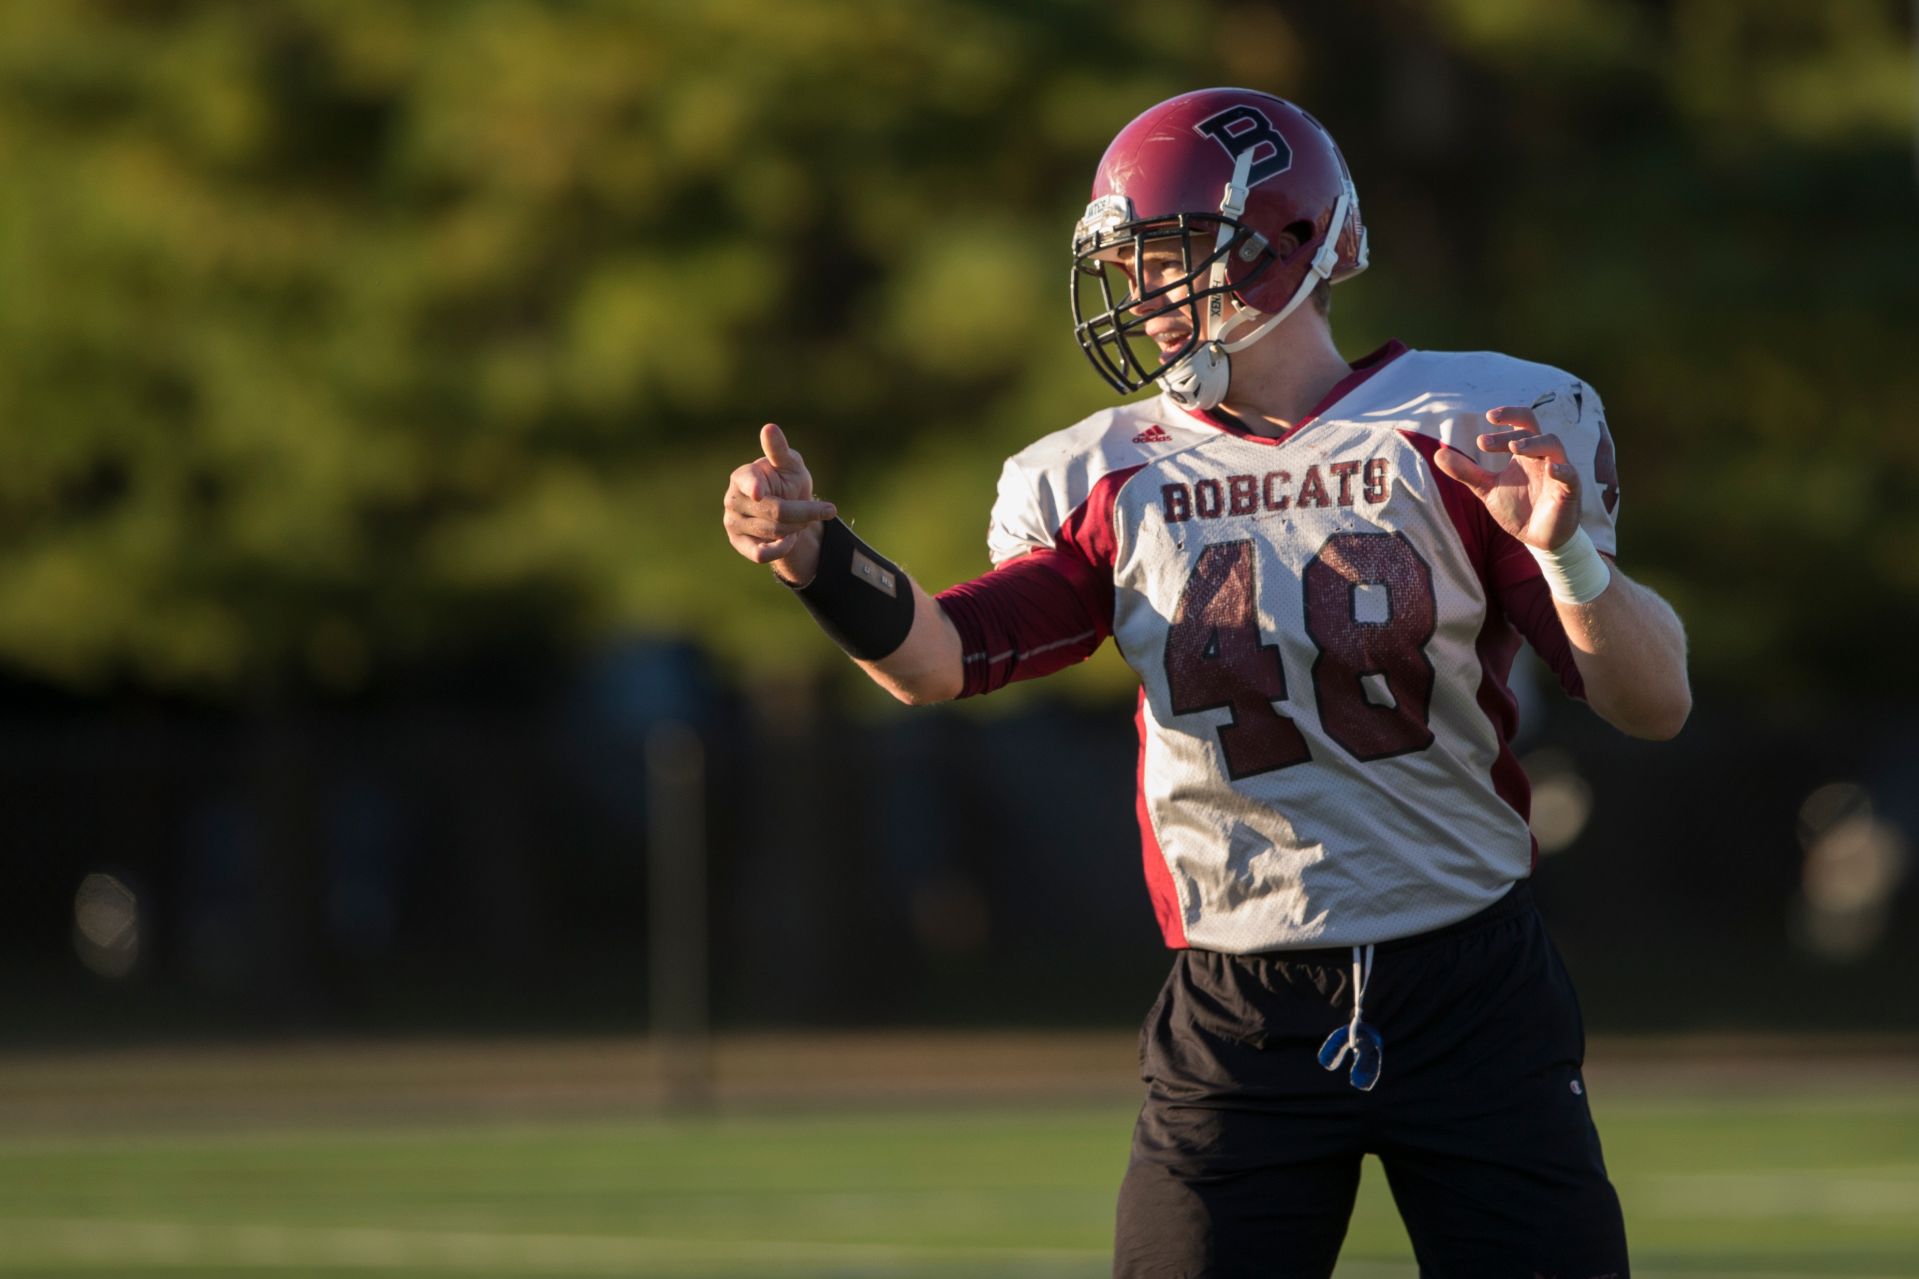 Video: For football’s Mark Upton ’17, commitment to Bates comes first